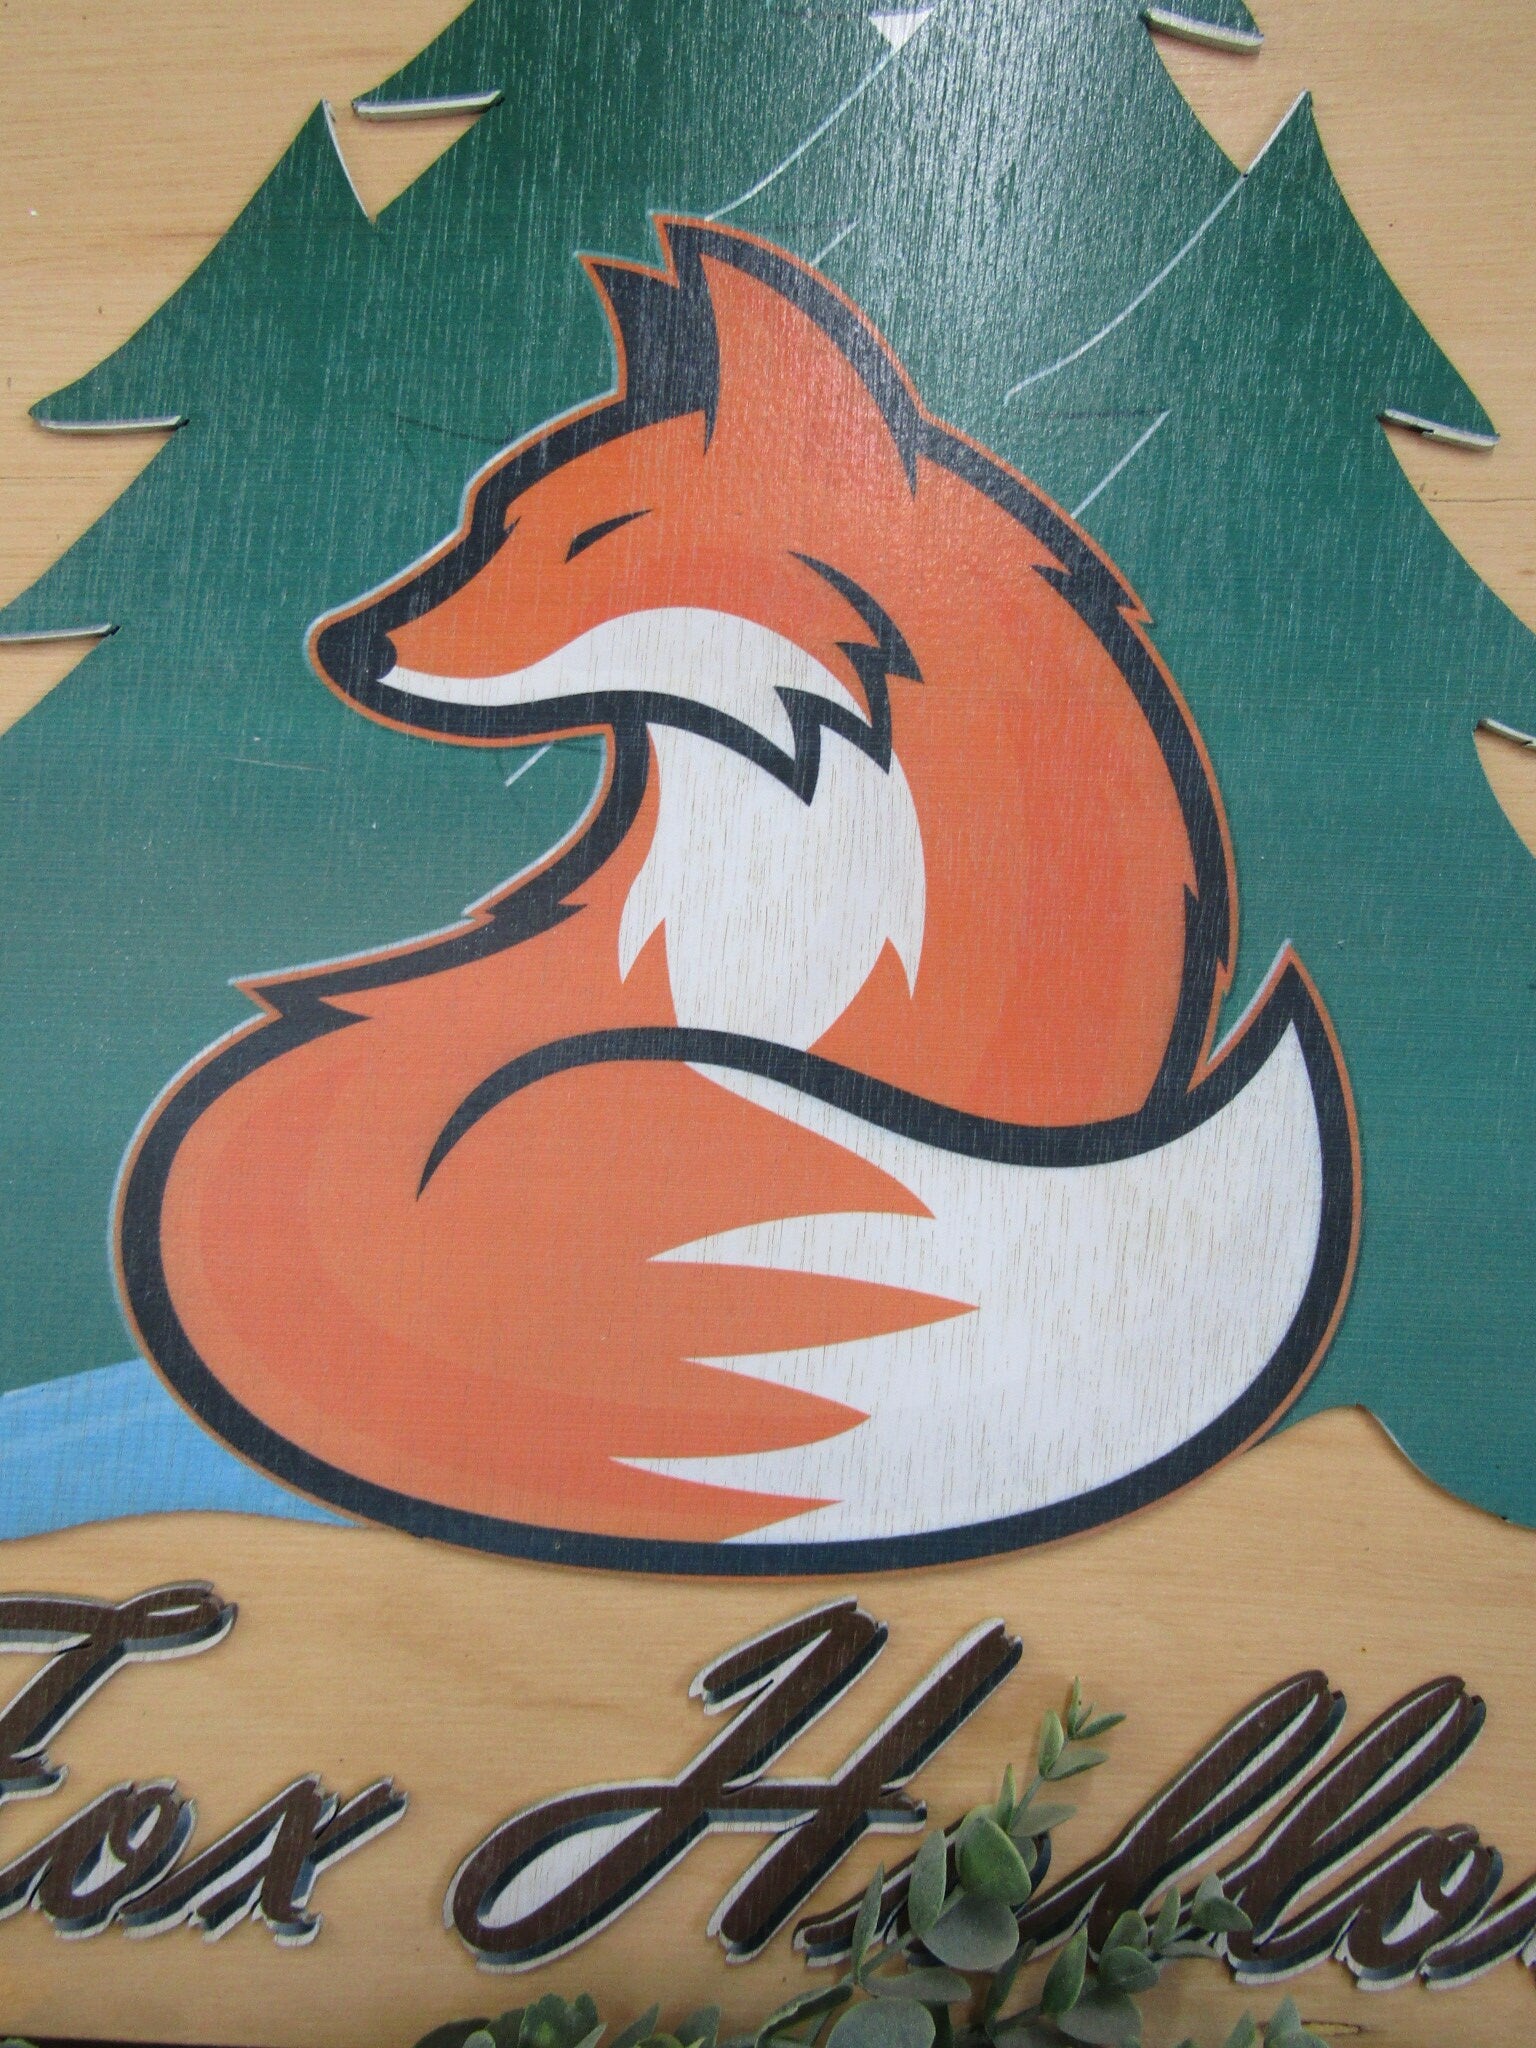 Square Custom Commerical Signage Fox Hollow Wooden Sign Forest Theme Uv Printed Image Your Logo Handmade Sign Raised Images In Color Camping